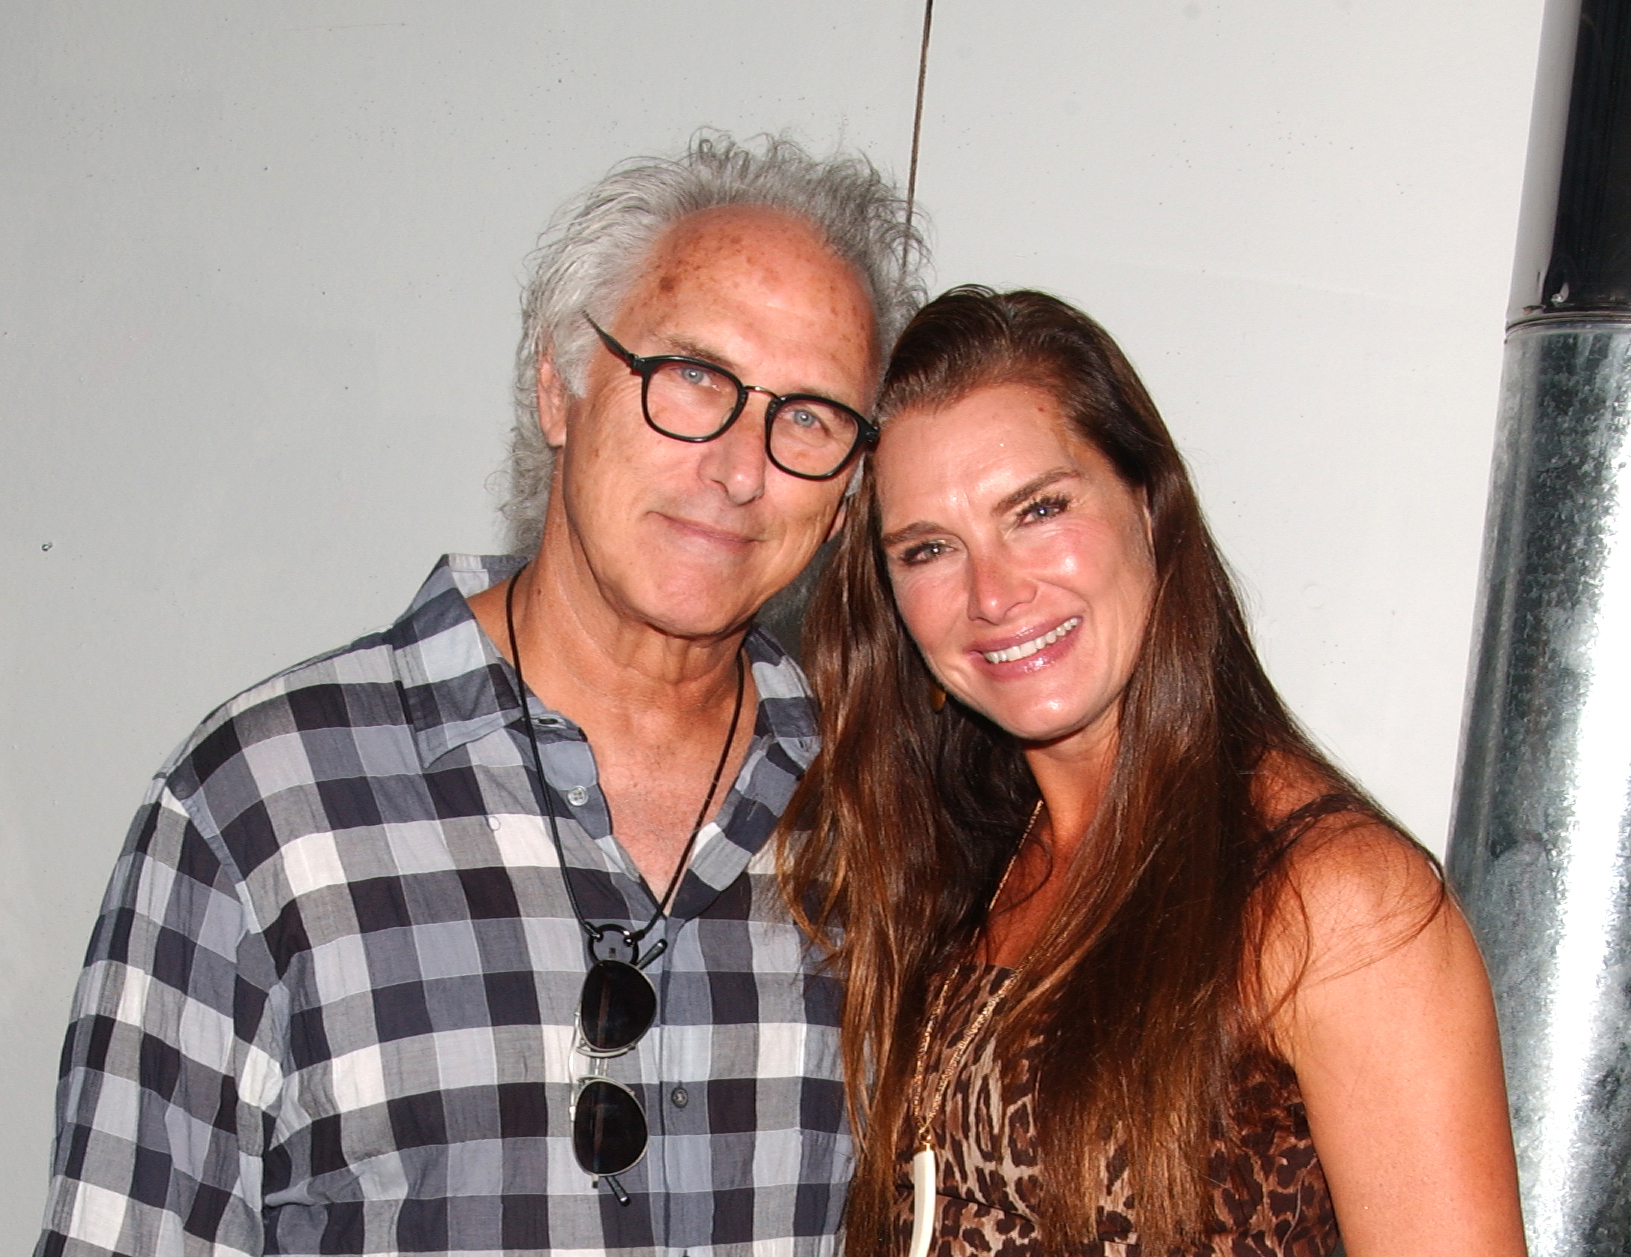 Artist Eric Fischl and Actress/Model Brooke Shields attend an event in celebration of Eric's forthcoming exhibition at the Dallas Contemporary at the former home and studio of artist Elaine de Kooing, East Hampton, NY.